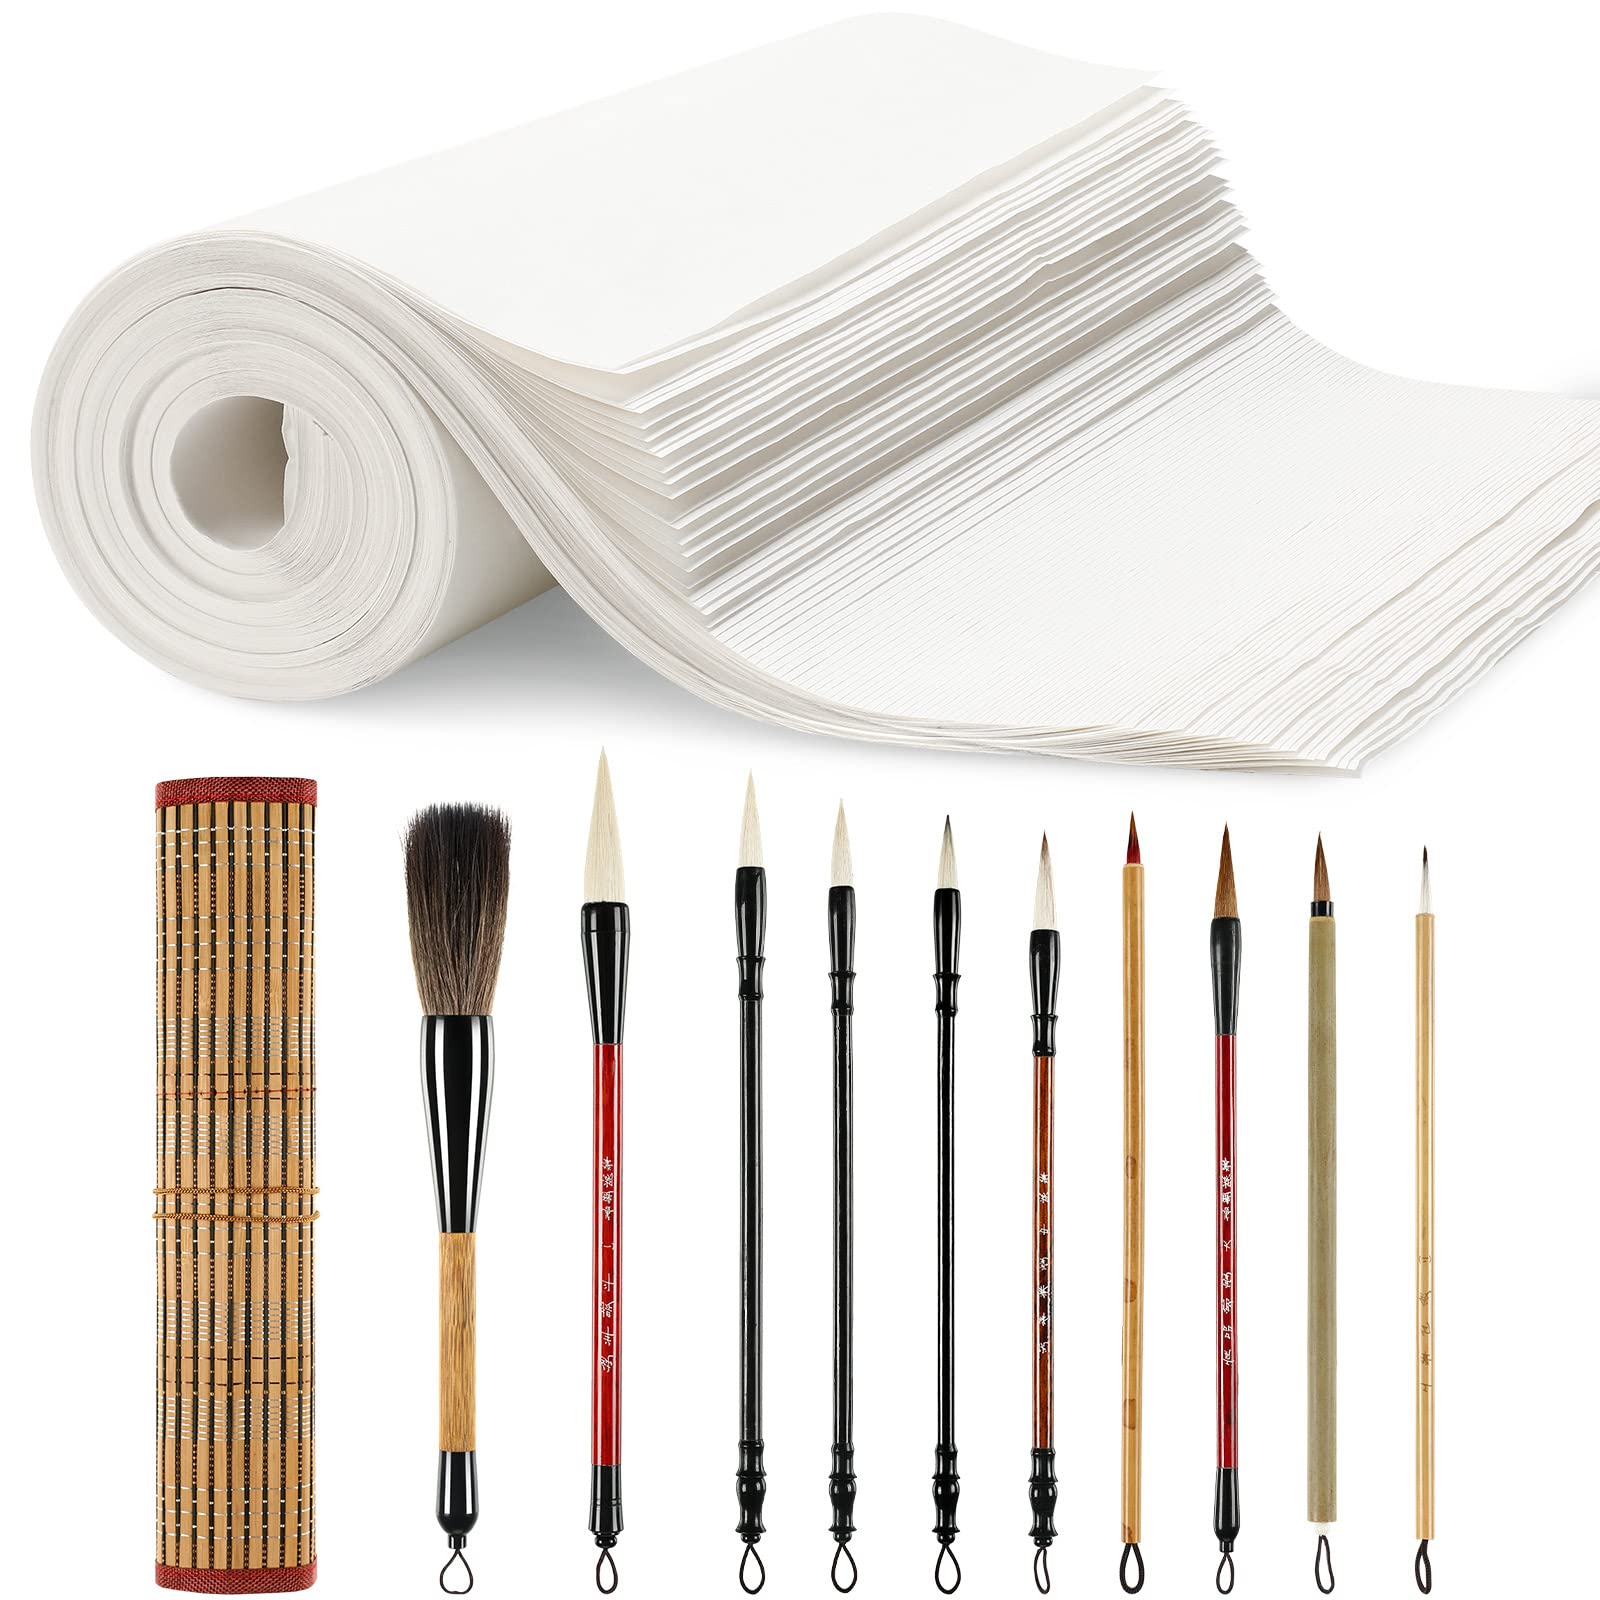  Xuan Paper Drawing Paper for sumi-e Brush Chinese Japanese  Calligraphy Practice Writing Rice Paper Without Grids 100 Sheets : Arts,  Crafts & Sewing